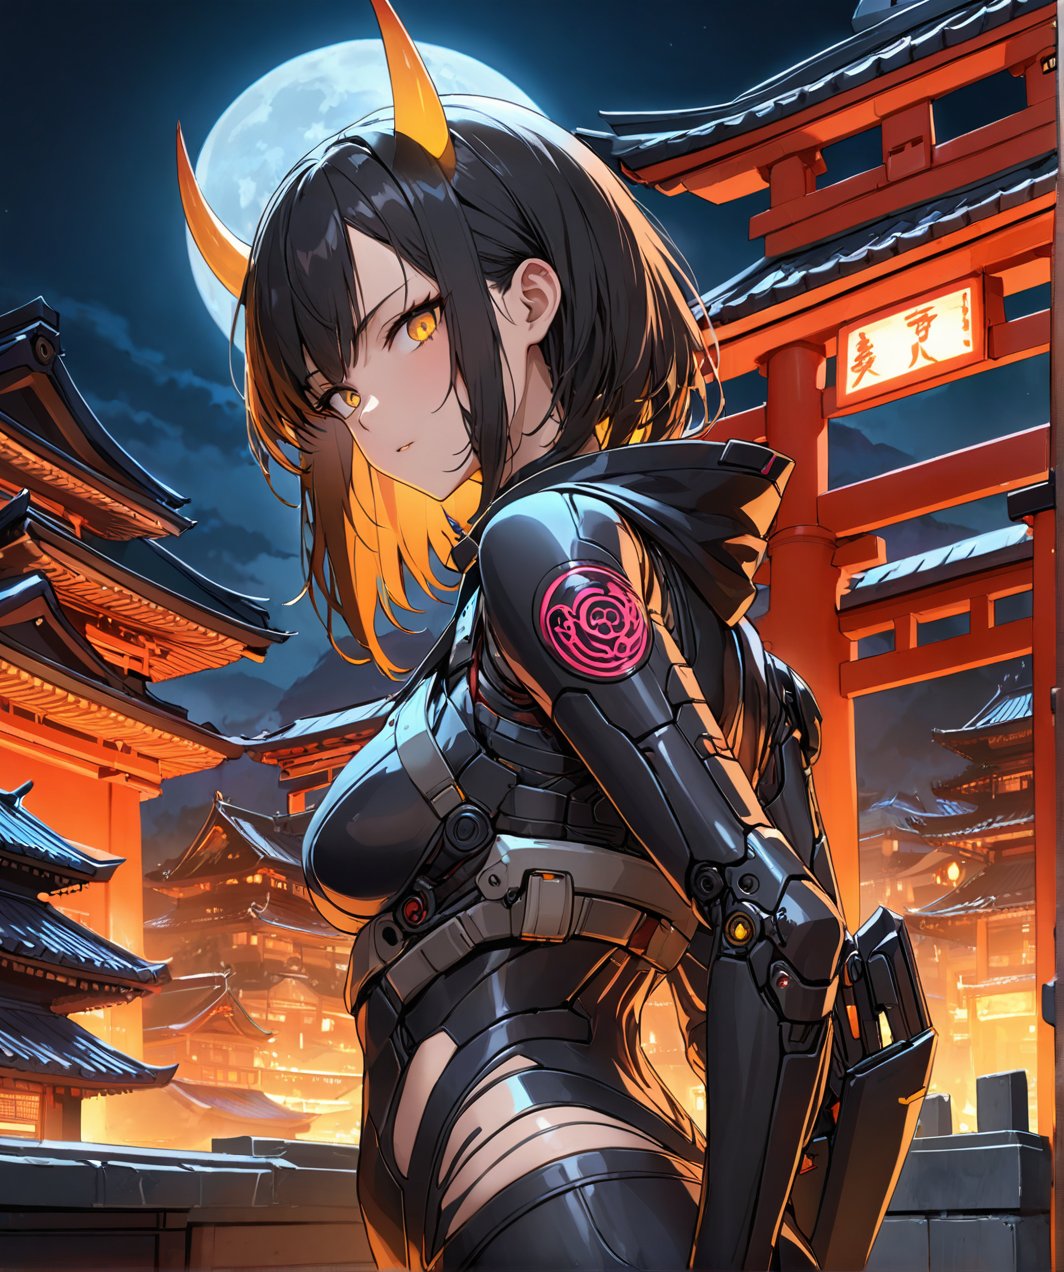 side view, look at camera,at night,half body shot,long black hair,1girl orange and black ghost ronin,horn on helmet,perfect body,yellow eye,super detail,sharp,masterpiece,cyberpunk meg suite,ronin costume,background is neon color,blue,orange, he stand on the roof top of temple ,katana.,cyborg,midnight,moon.